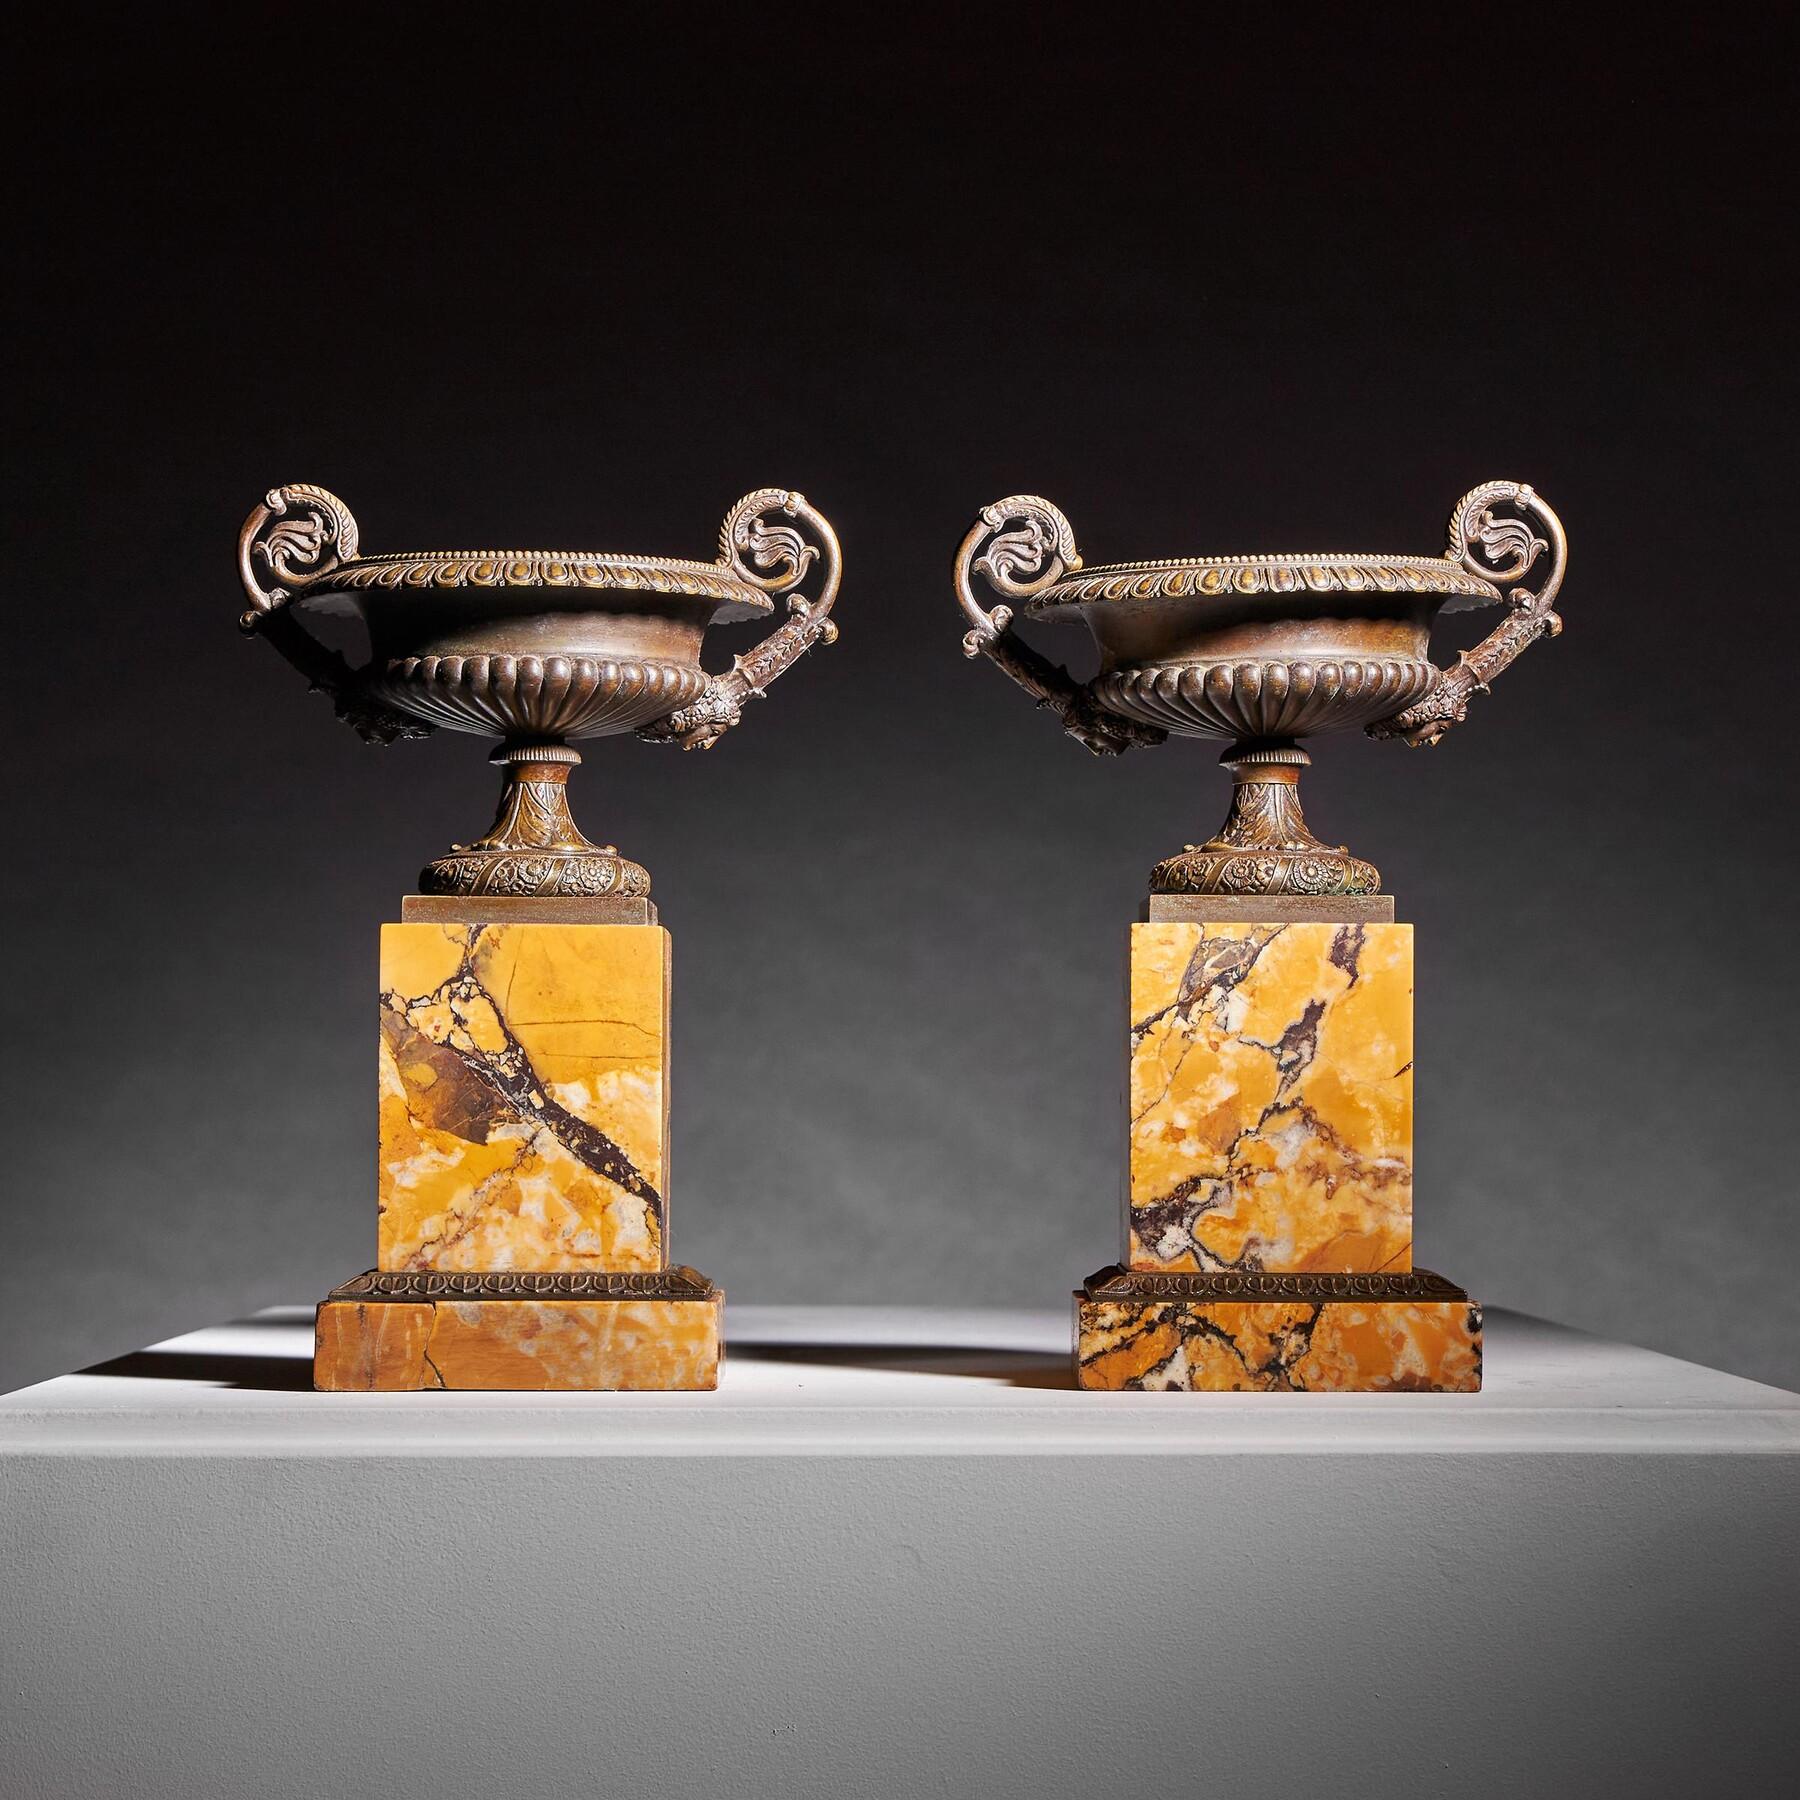 A Pair of Early 19th Century French Bronze and Marble Tazzas of Particularly High Quality and Large Size

French Circa 1820

These tazzas are incredibly finely detailed and of the finest quality throughout. The bases of the tazzas themselves are